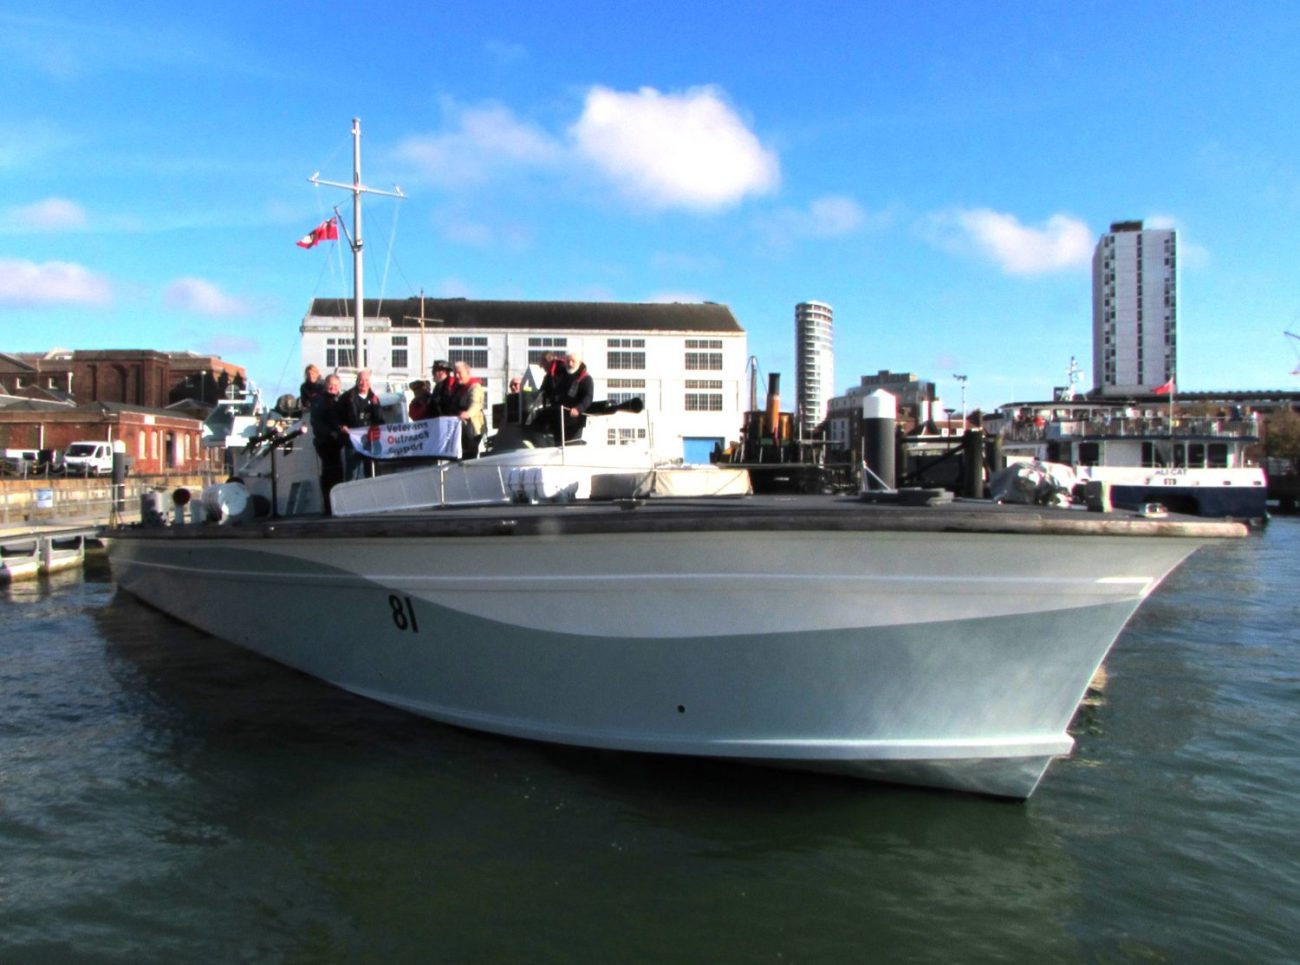 A photo of Motor Gun Boat 81, which is a small Royal Navy vessel from World War II. She is moored outside Boathouse 4 in Portsmouth Historic Dockyard. There's a group of people aboard her holding up a white banner with the Veterans Outreach Support charity logo on it. | VOS